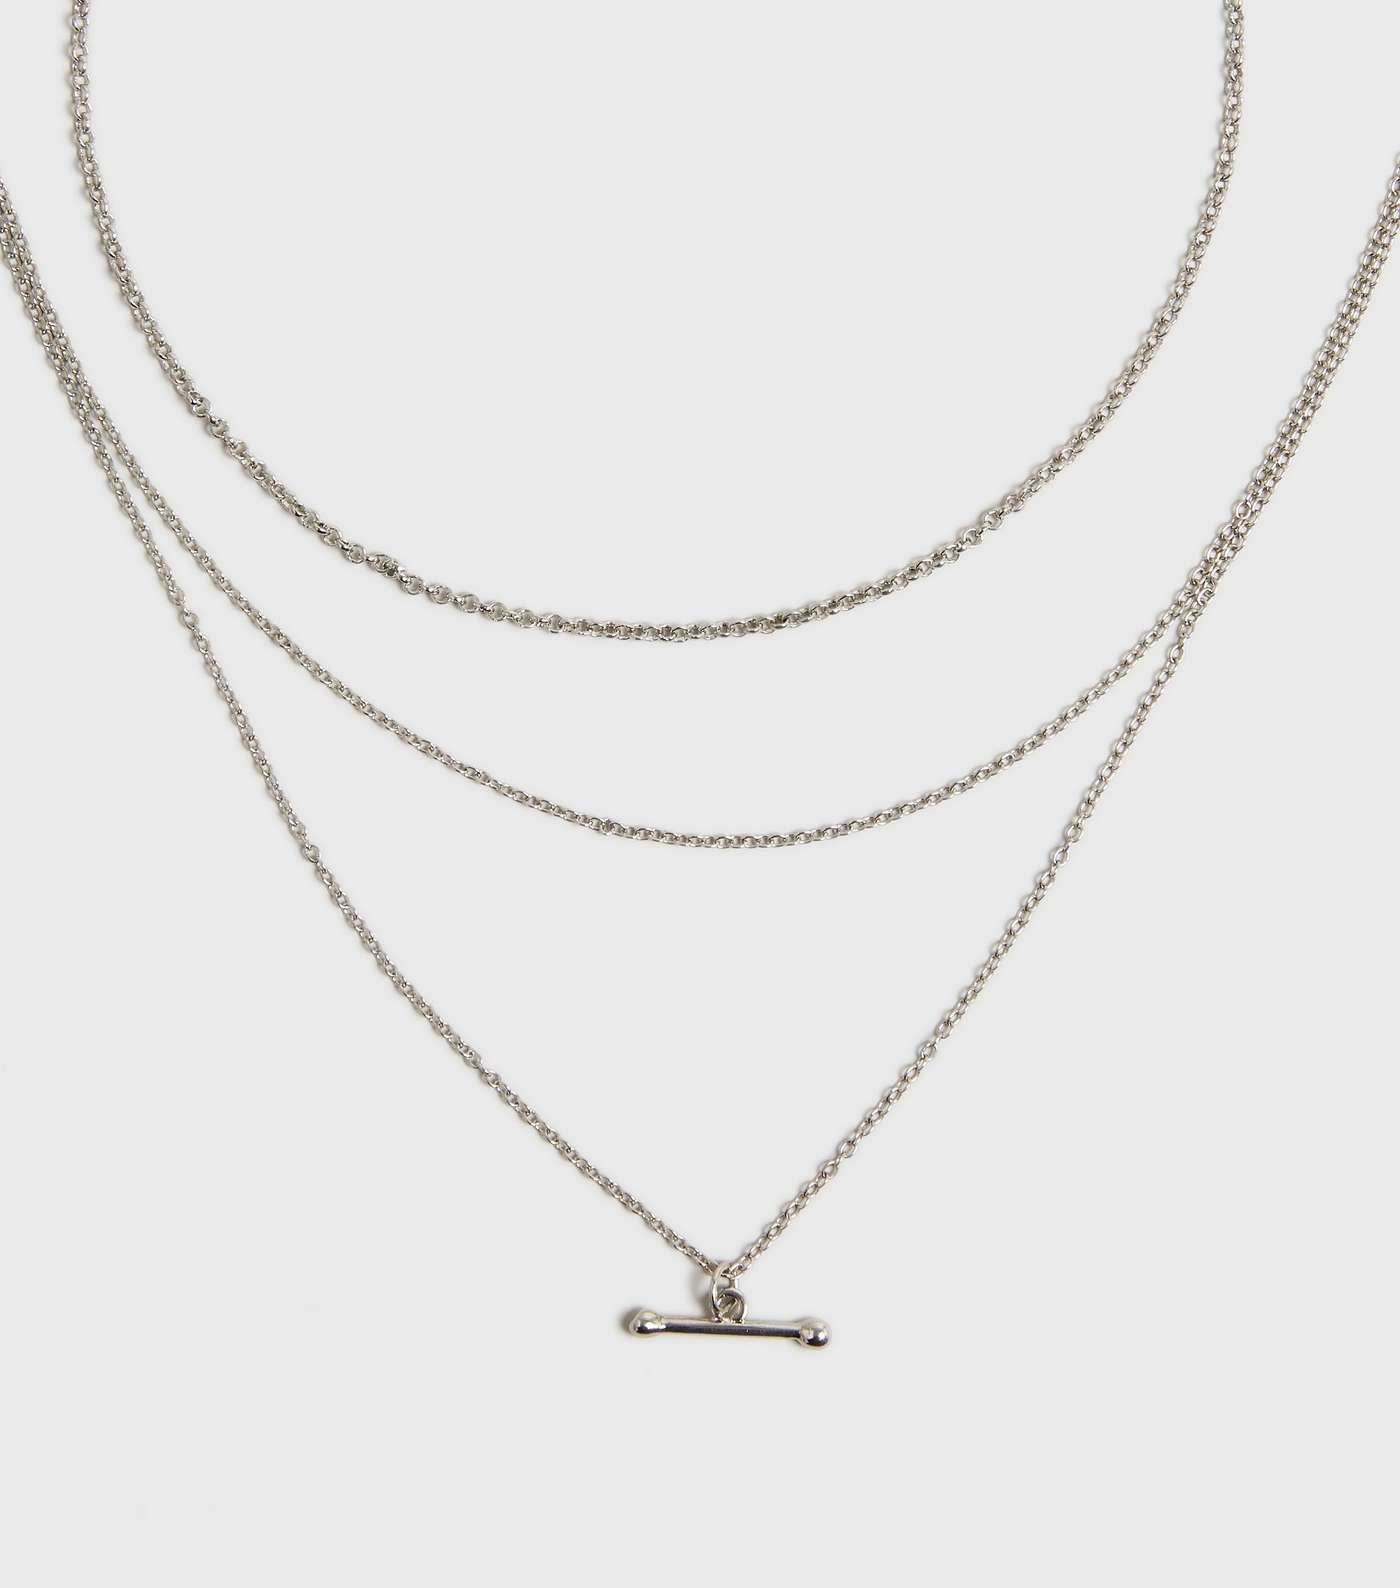 Silver T-Bar Pendant Layered Chain Necklace